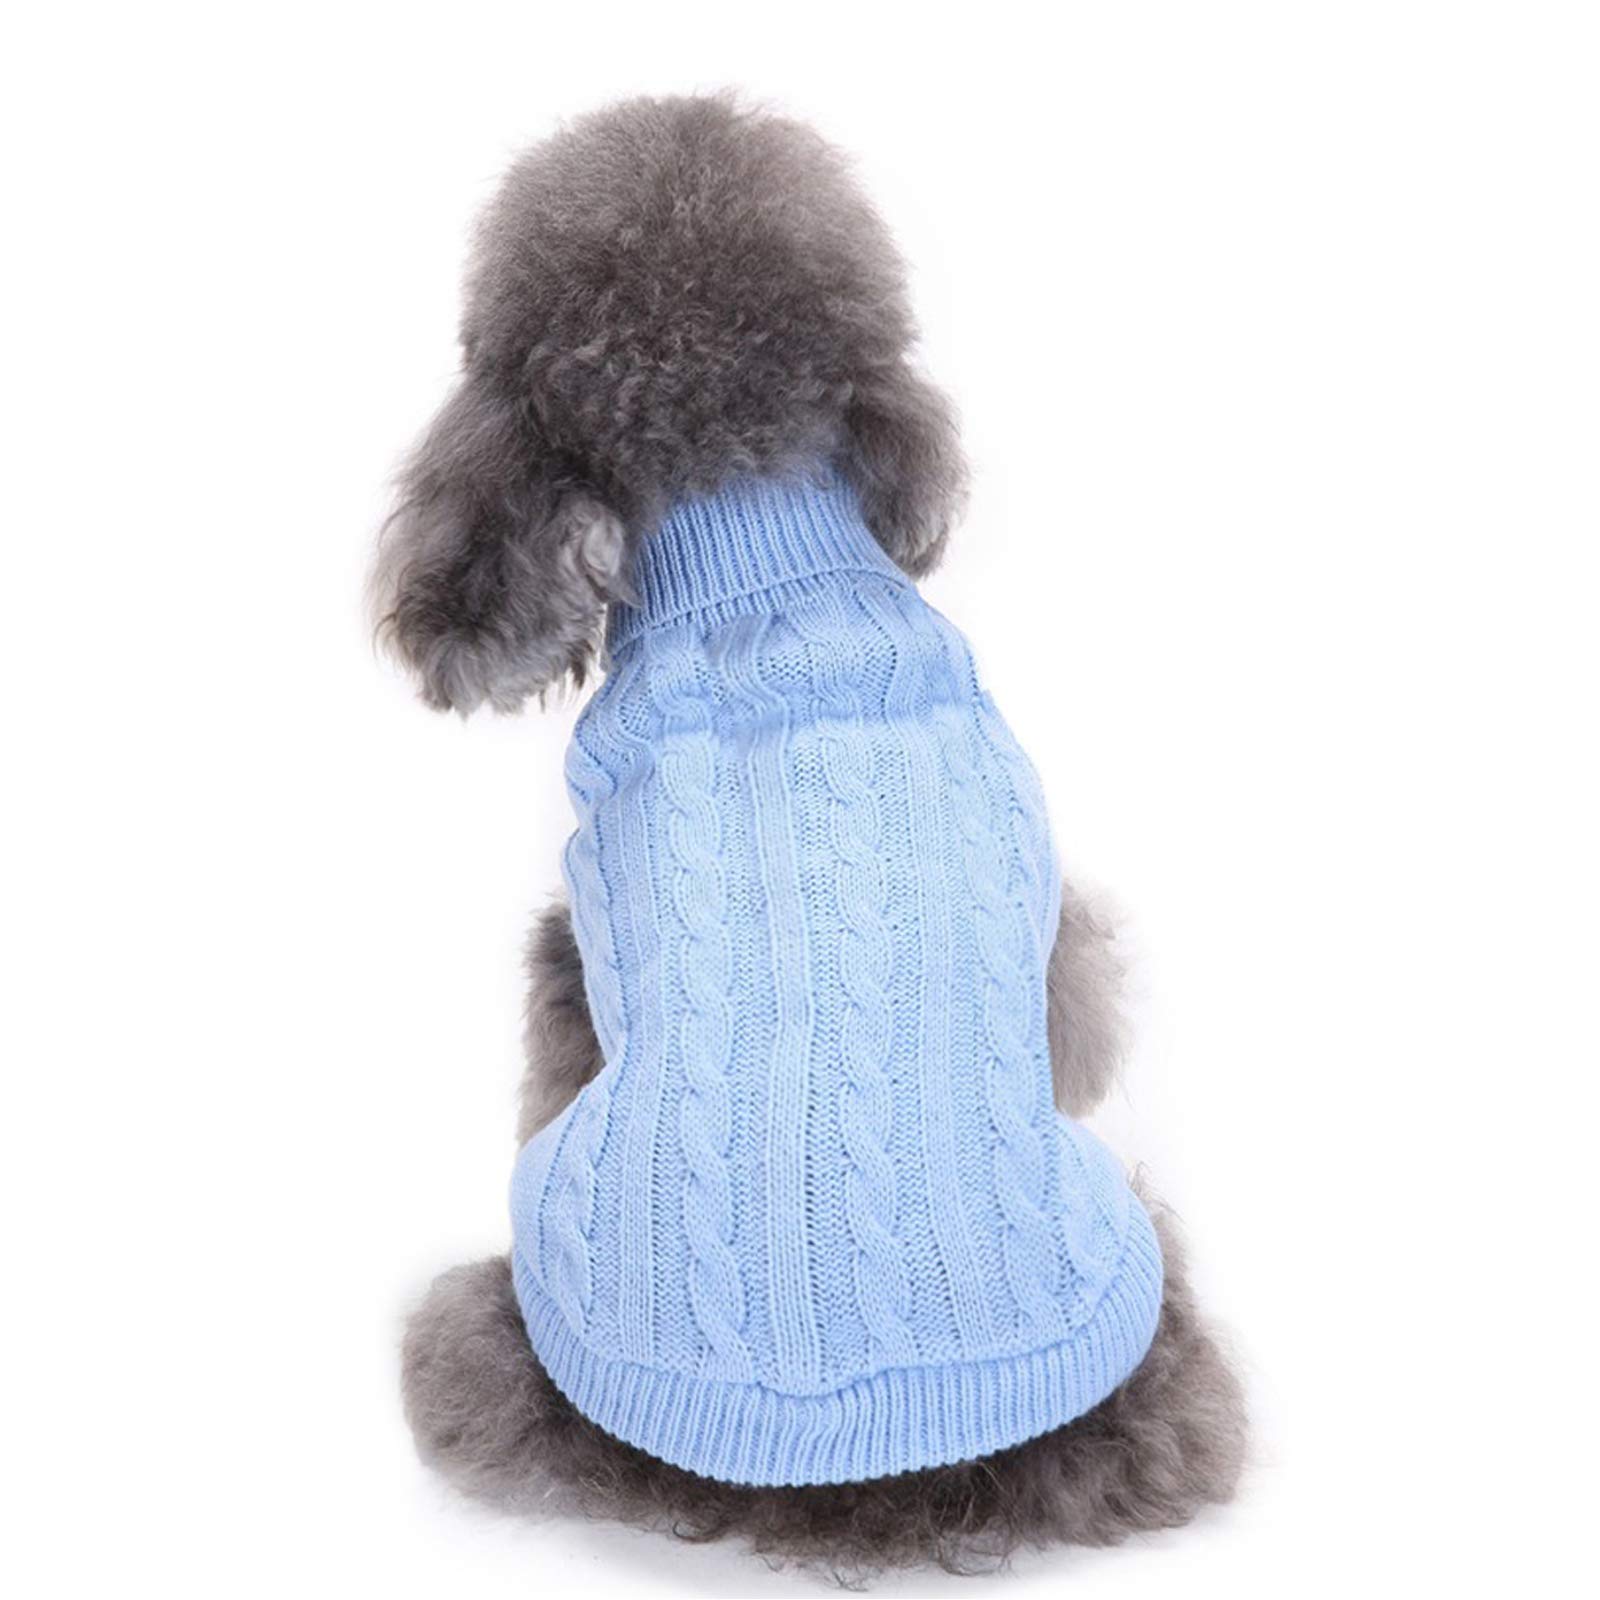 Bwealthest Dog Sweater, Warm Pet Sweater, Dog Sweaters for Small Dogs Medium Dogs Large Dogs, cute Knitted classic cat Sweater Dog clothes 